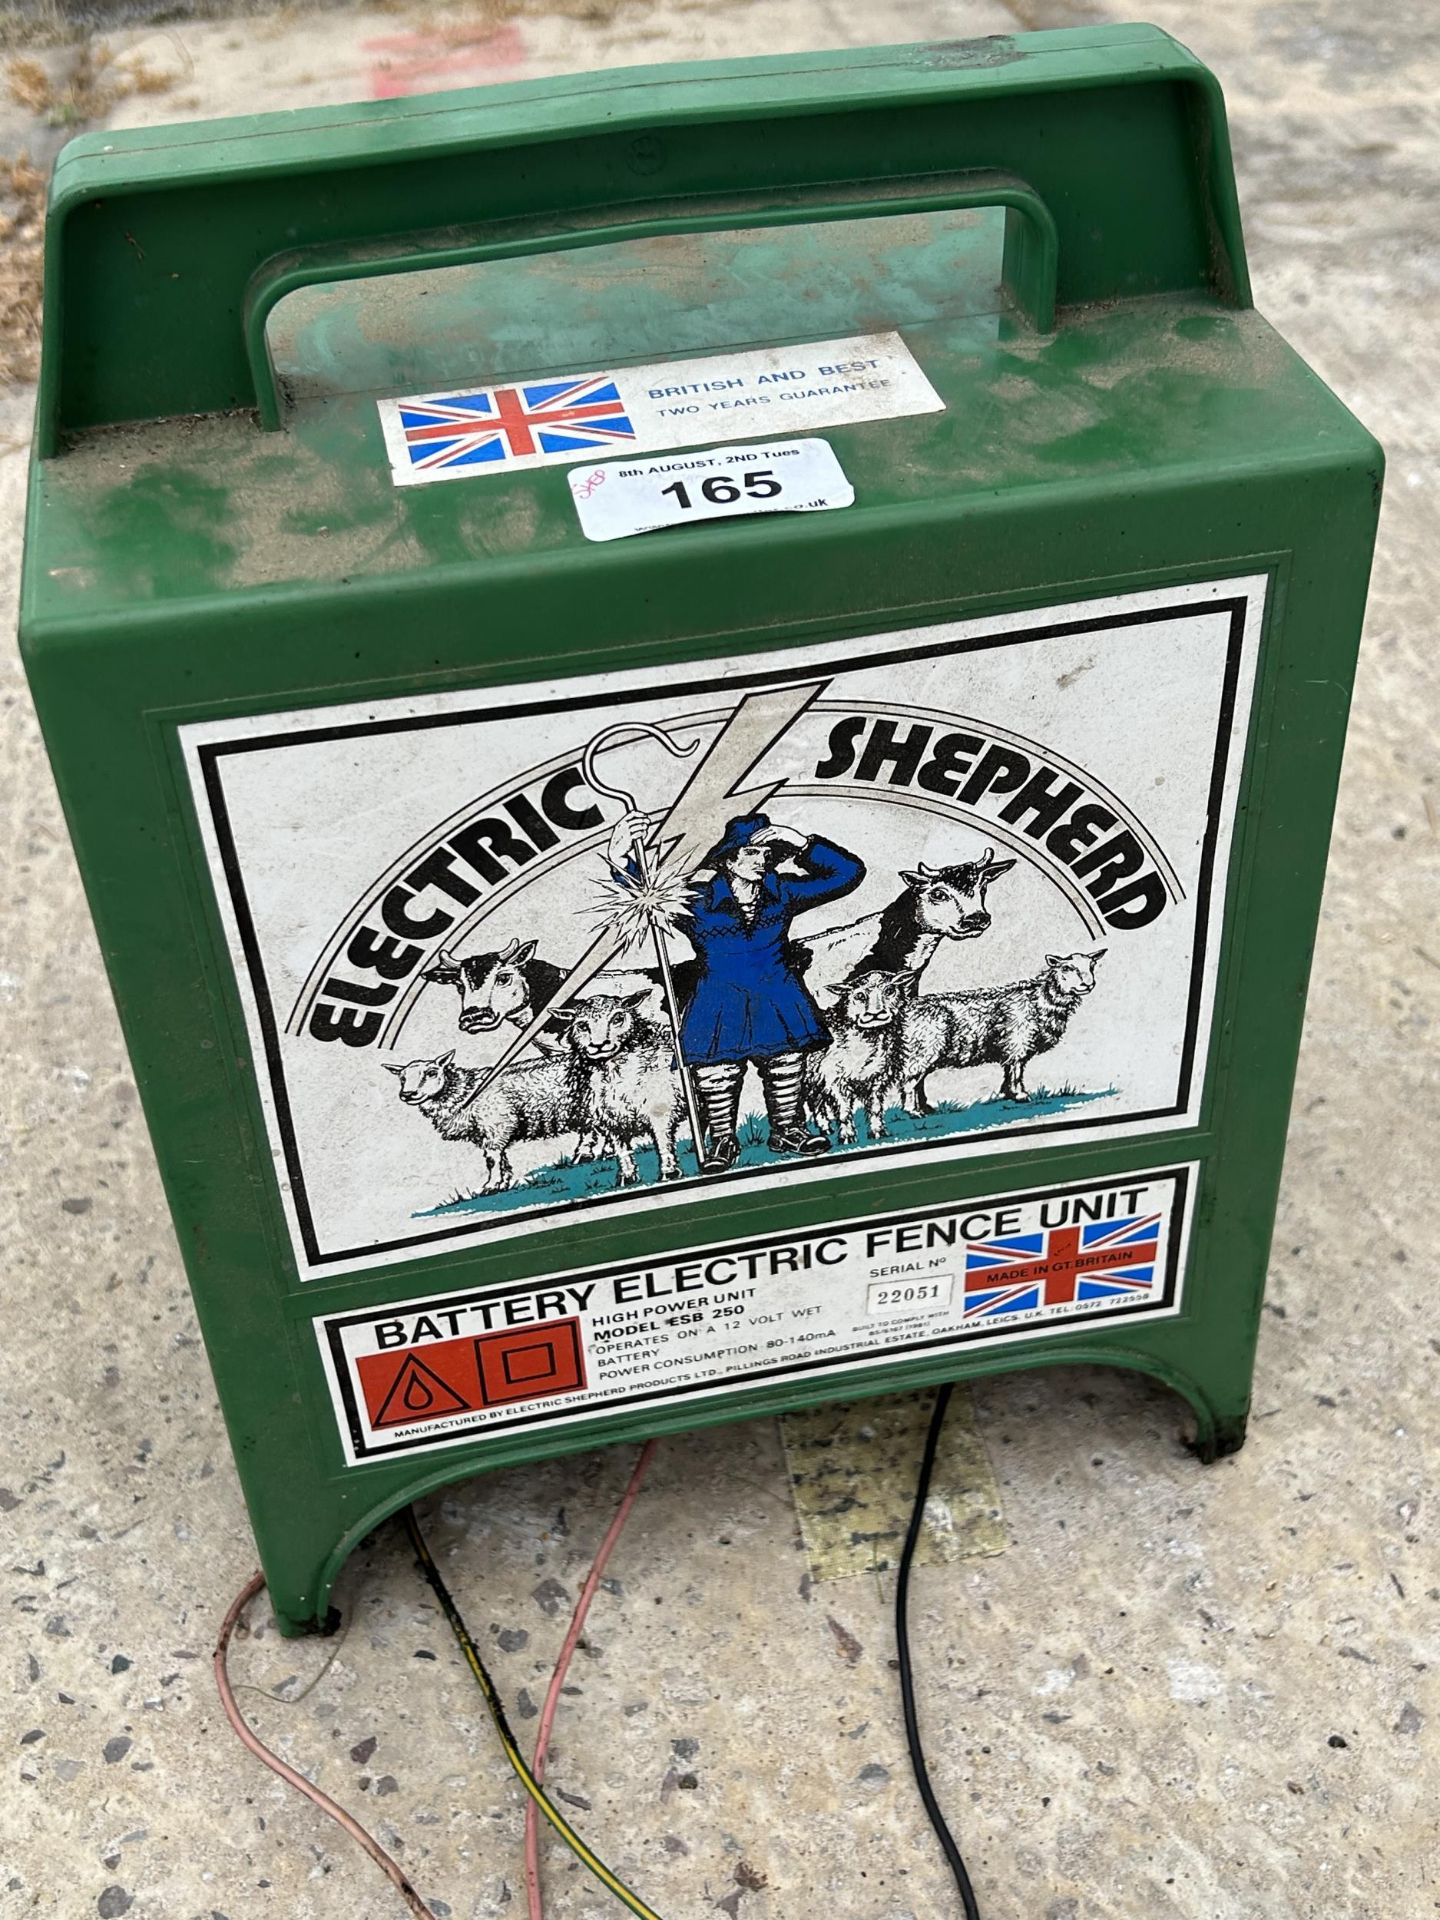 A SHEPARD BATTERY ELECTRIC FENCE UNIT, BELIEVED TO BE IN GOOD WORKING ORDER BUT NO WARRANTY - Image 2 of 3